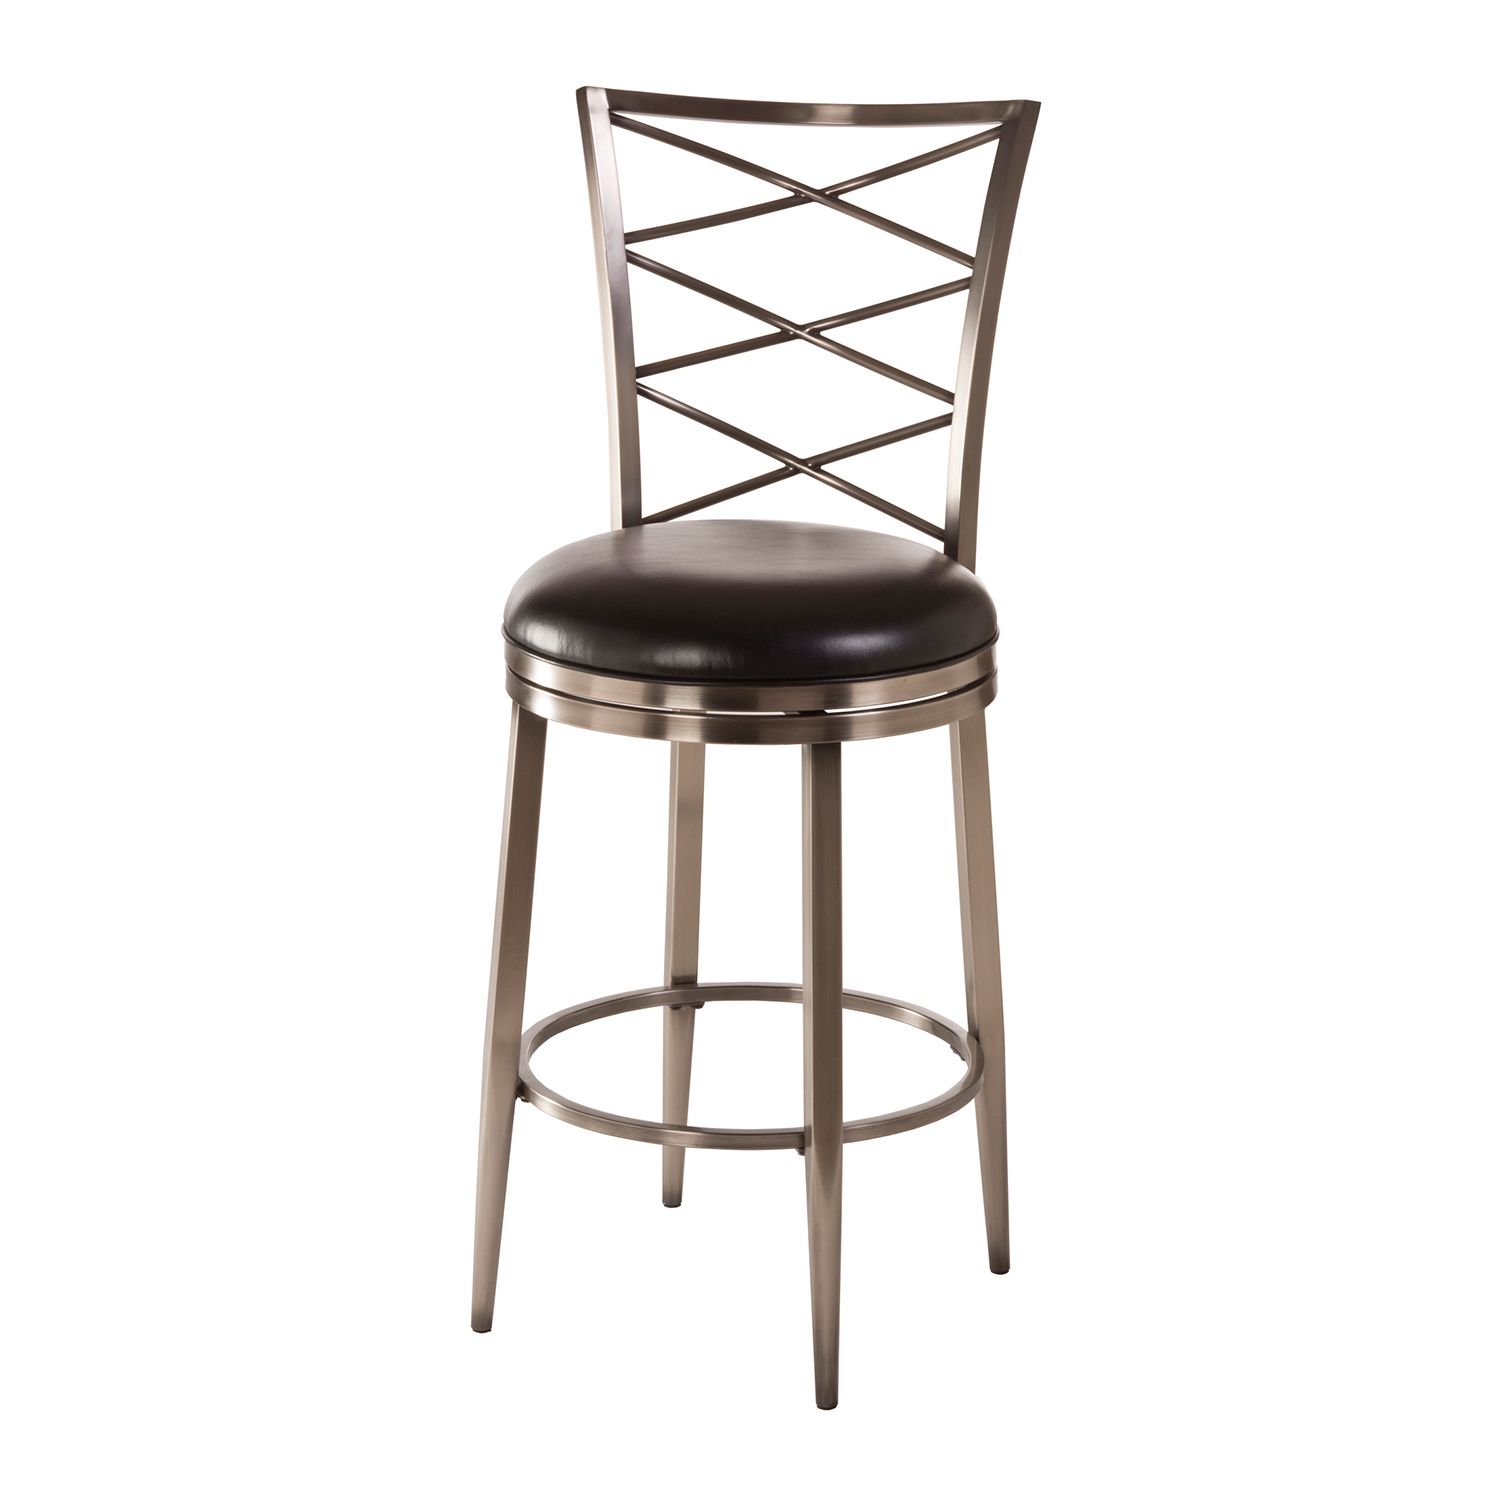 Image for Hillsdale Furniture Harlow Swivel Bar Stool at Kohl's.